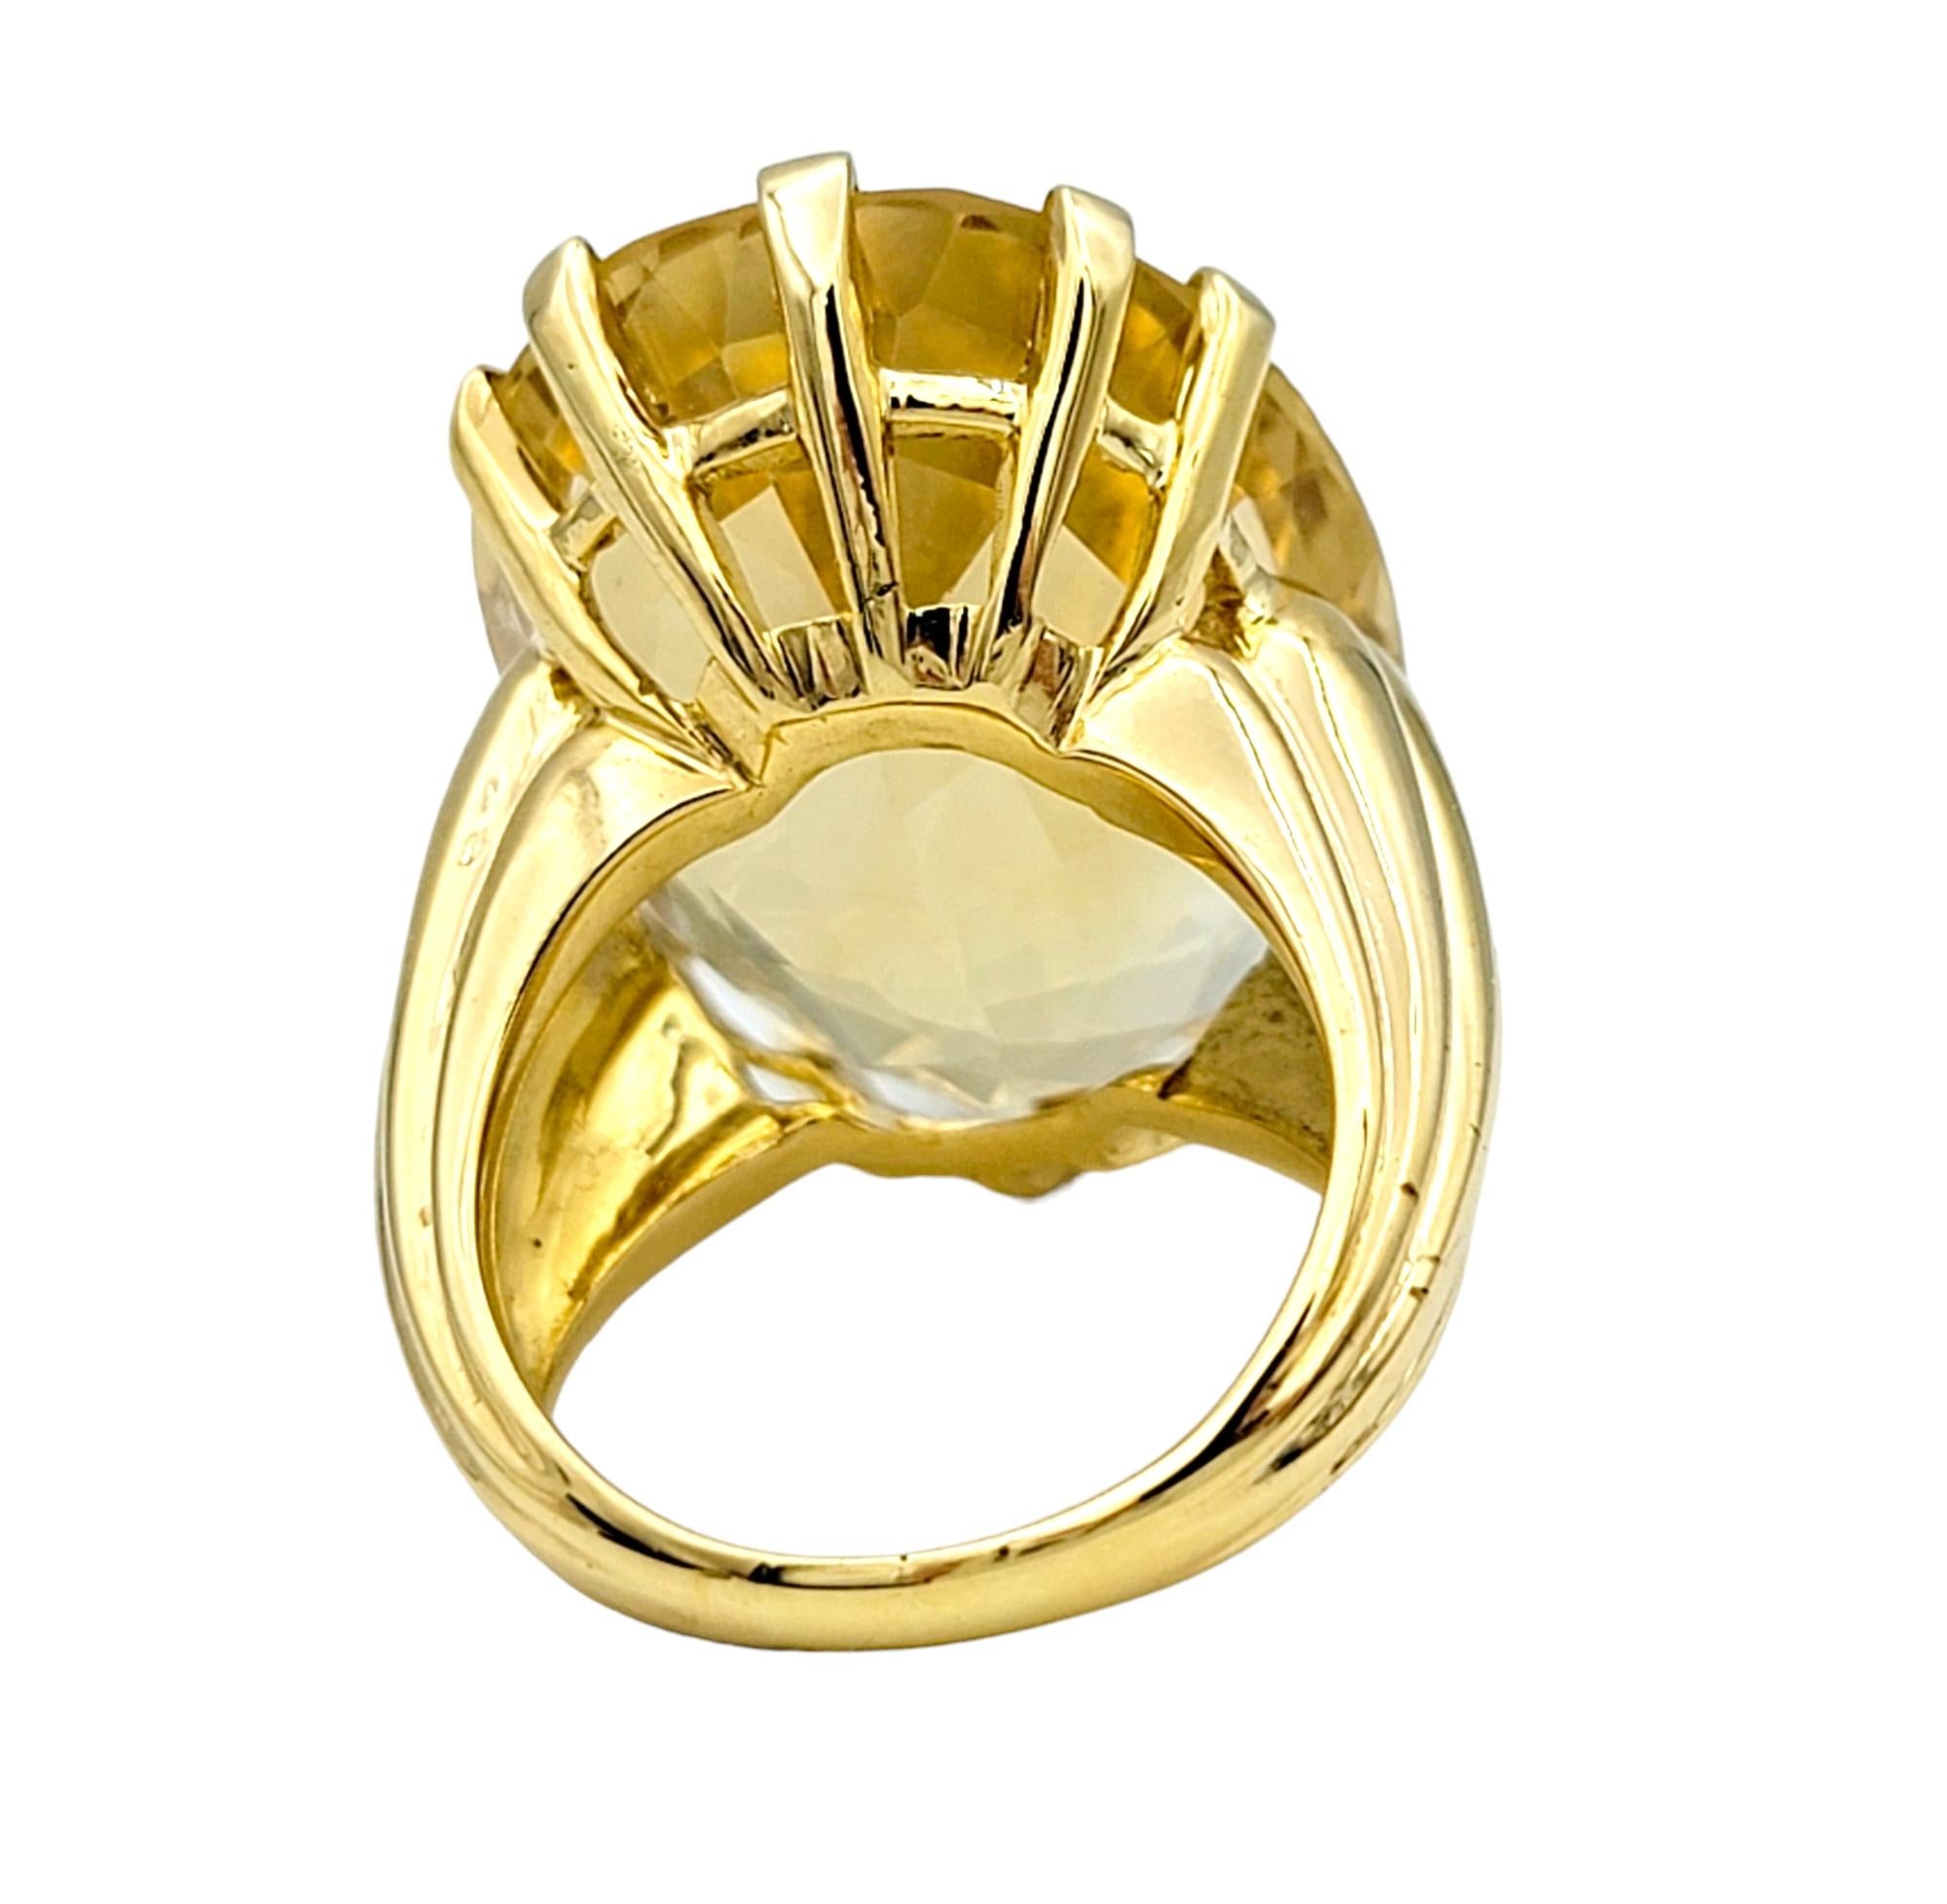 Huge 29.25 Carat Oval Citrine Solitaire Cocktail Ring in 14 Karat Yellow Gold In Good Condition For Sale In Scottsdale, AZ